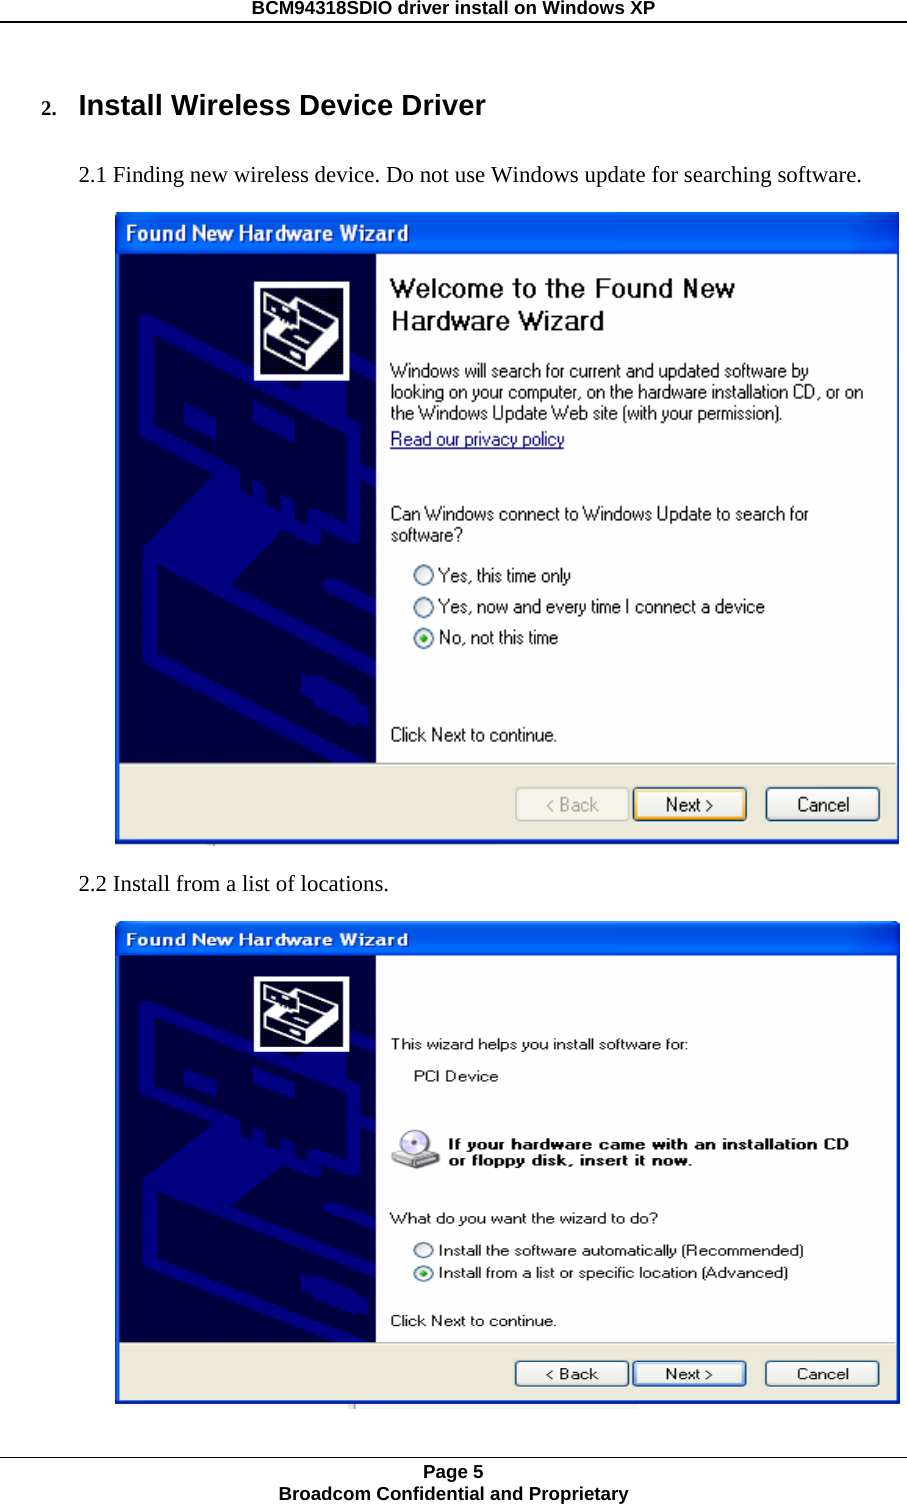 BCM94318SDIO driver install on Windows XP 2. Install Wireless Device Driver  2.1 Finding new wireless device. Do not use Windows update for searching software.   2.2 Install from a list of locations.   Page 5 Broadcom Confidential and Proprietary  